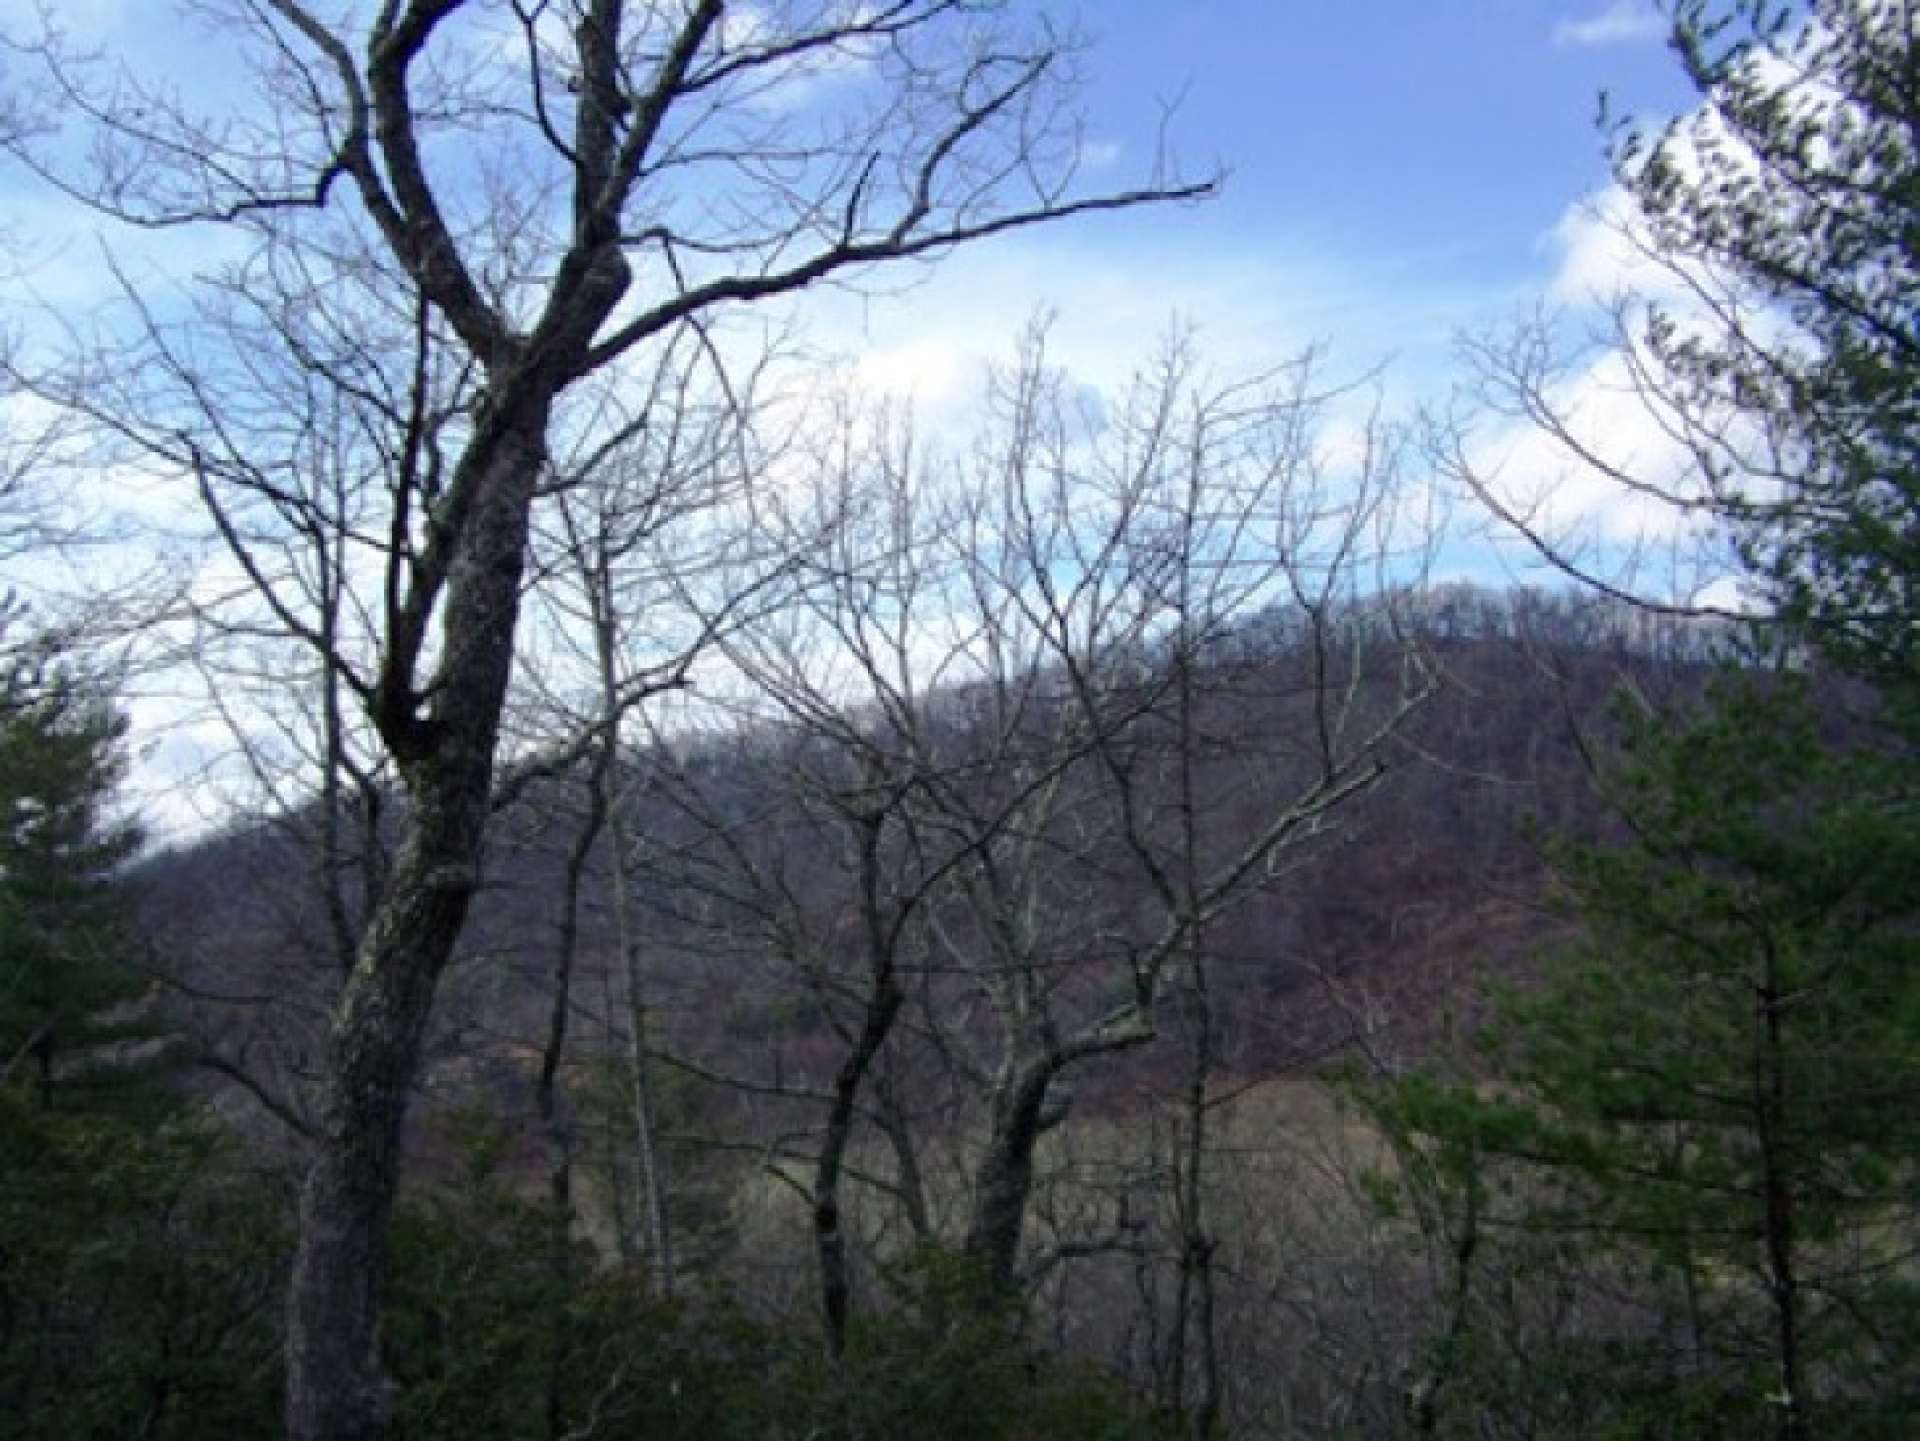 Lot 5 is offered at $24,900 and an ideal option for your NC Mountain cabin building site.  Call today for additional information on listing J225 * Broker Interest.